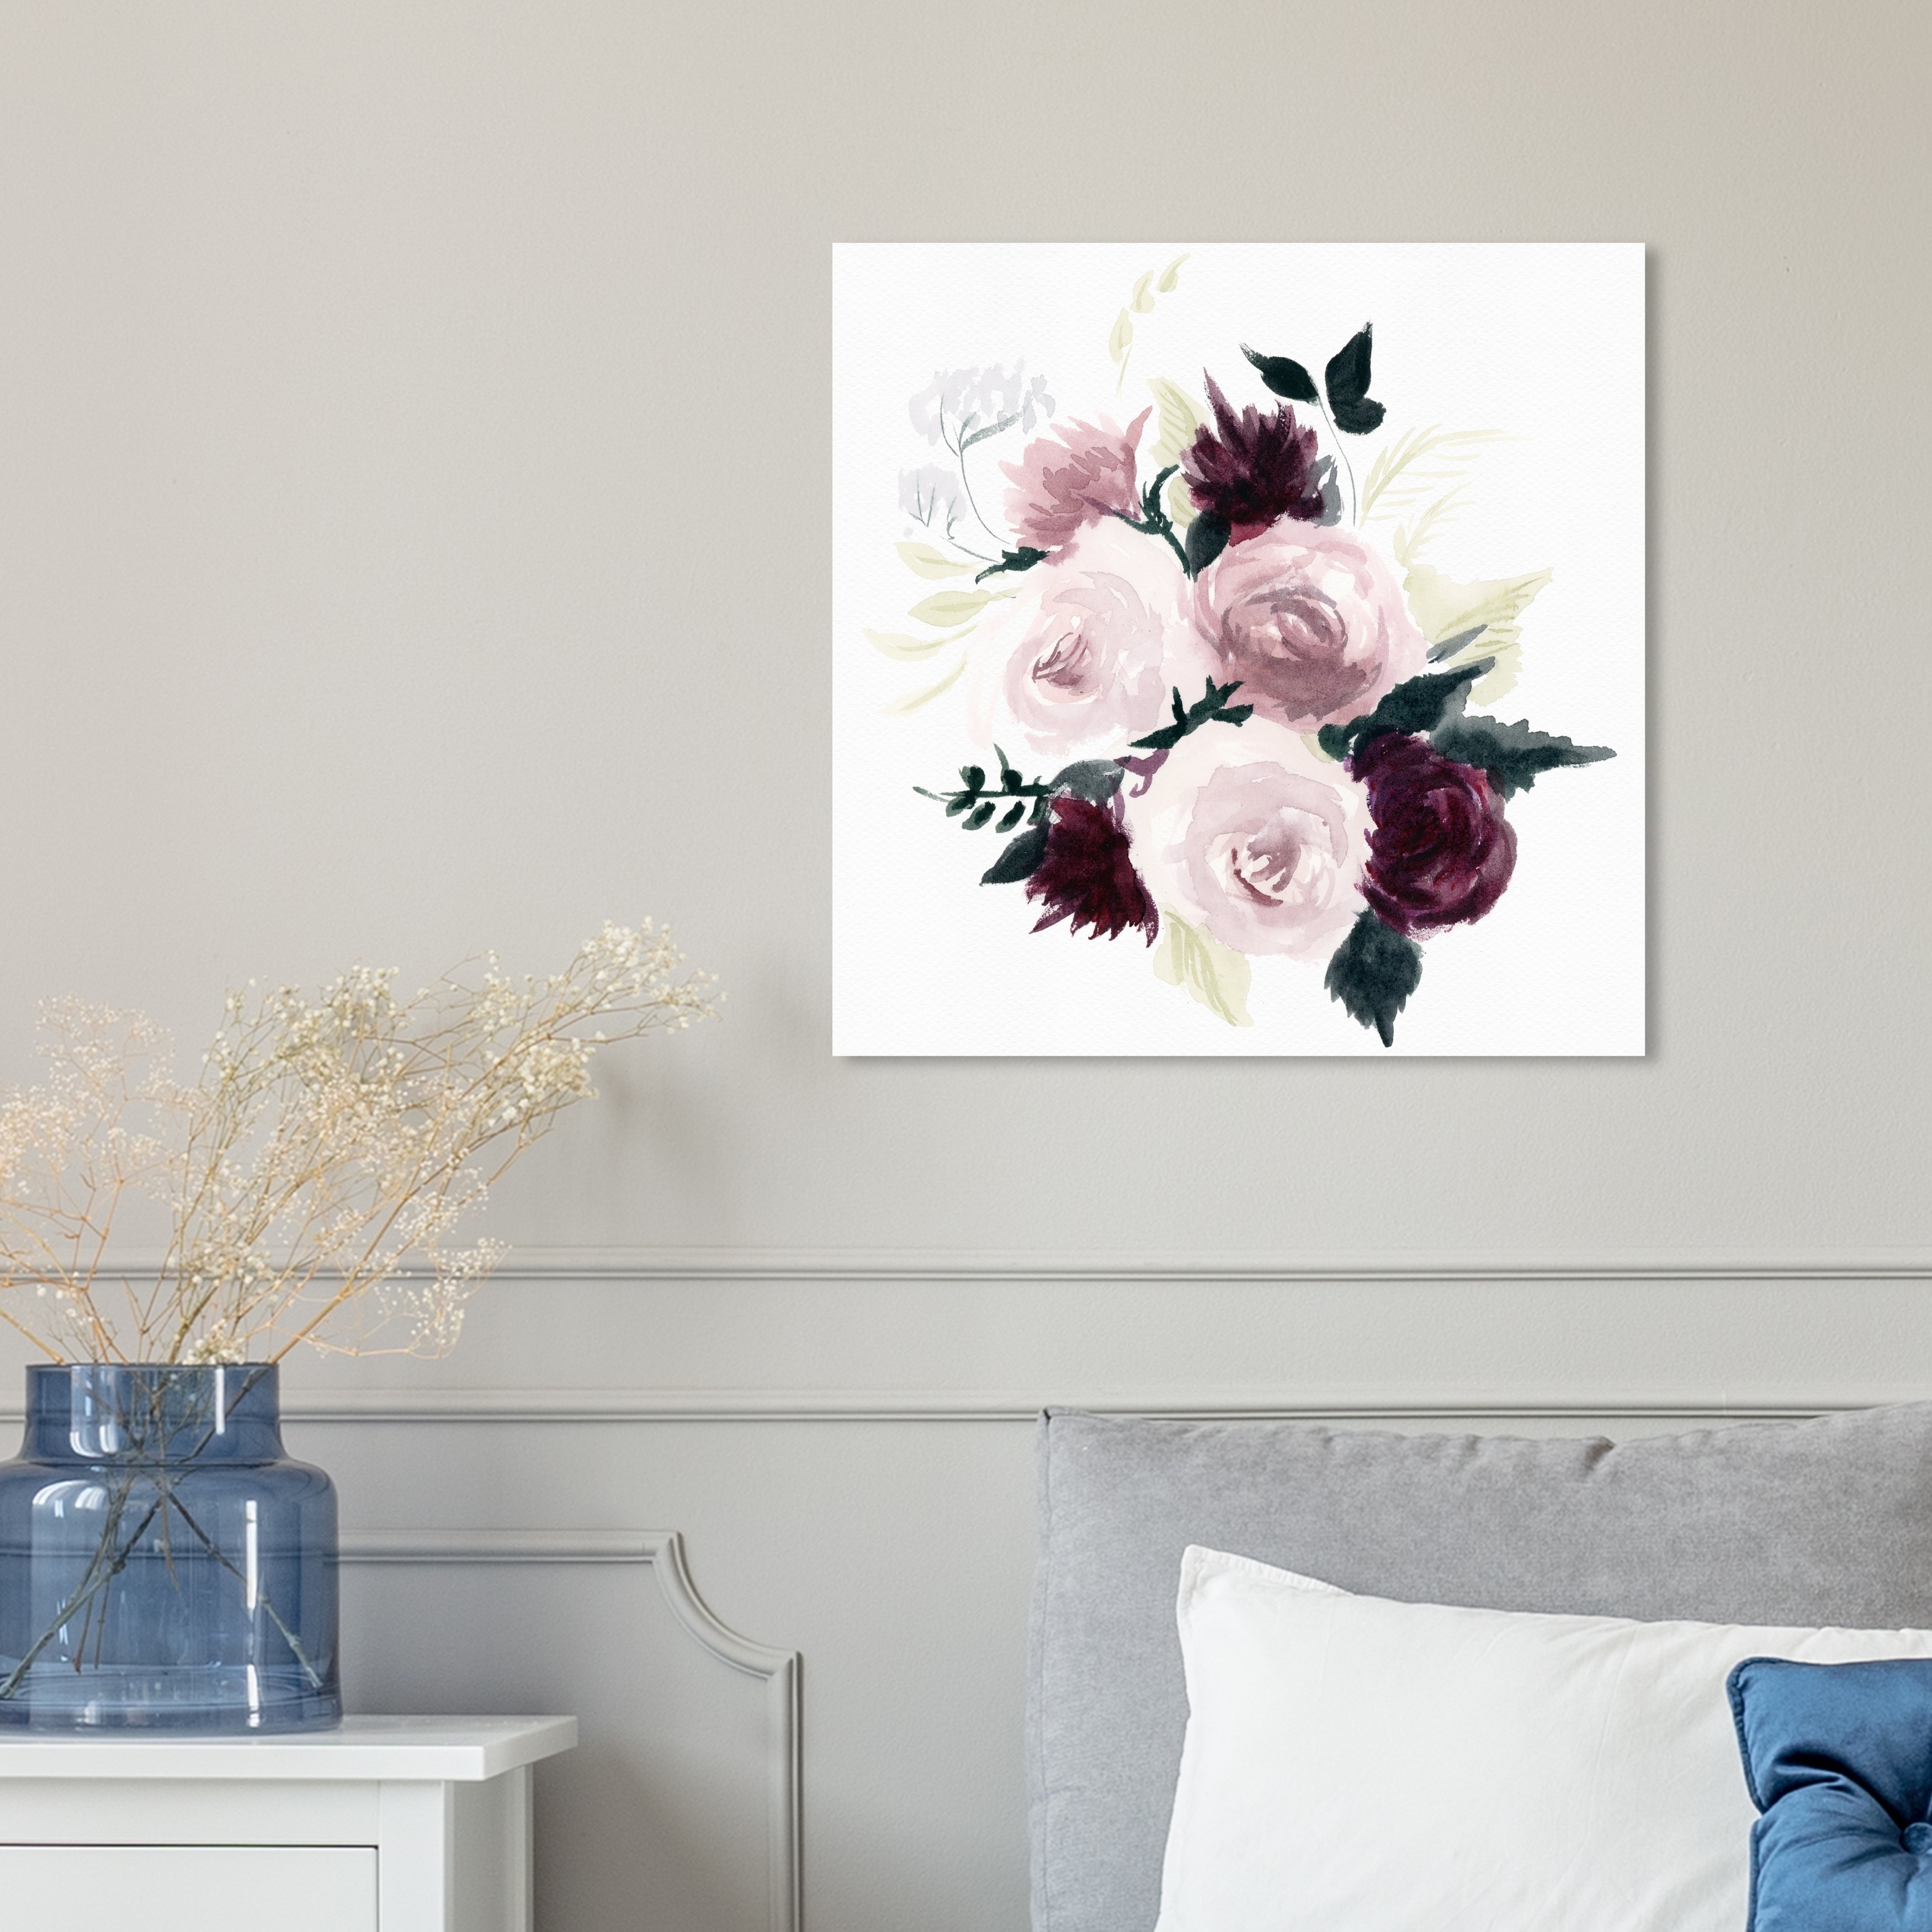 Oliver Gal 'Season Flowers' Floral and Botanical Wall Art Canvas Print Florals - Pink, White